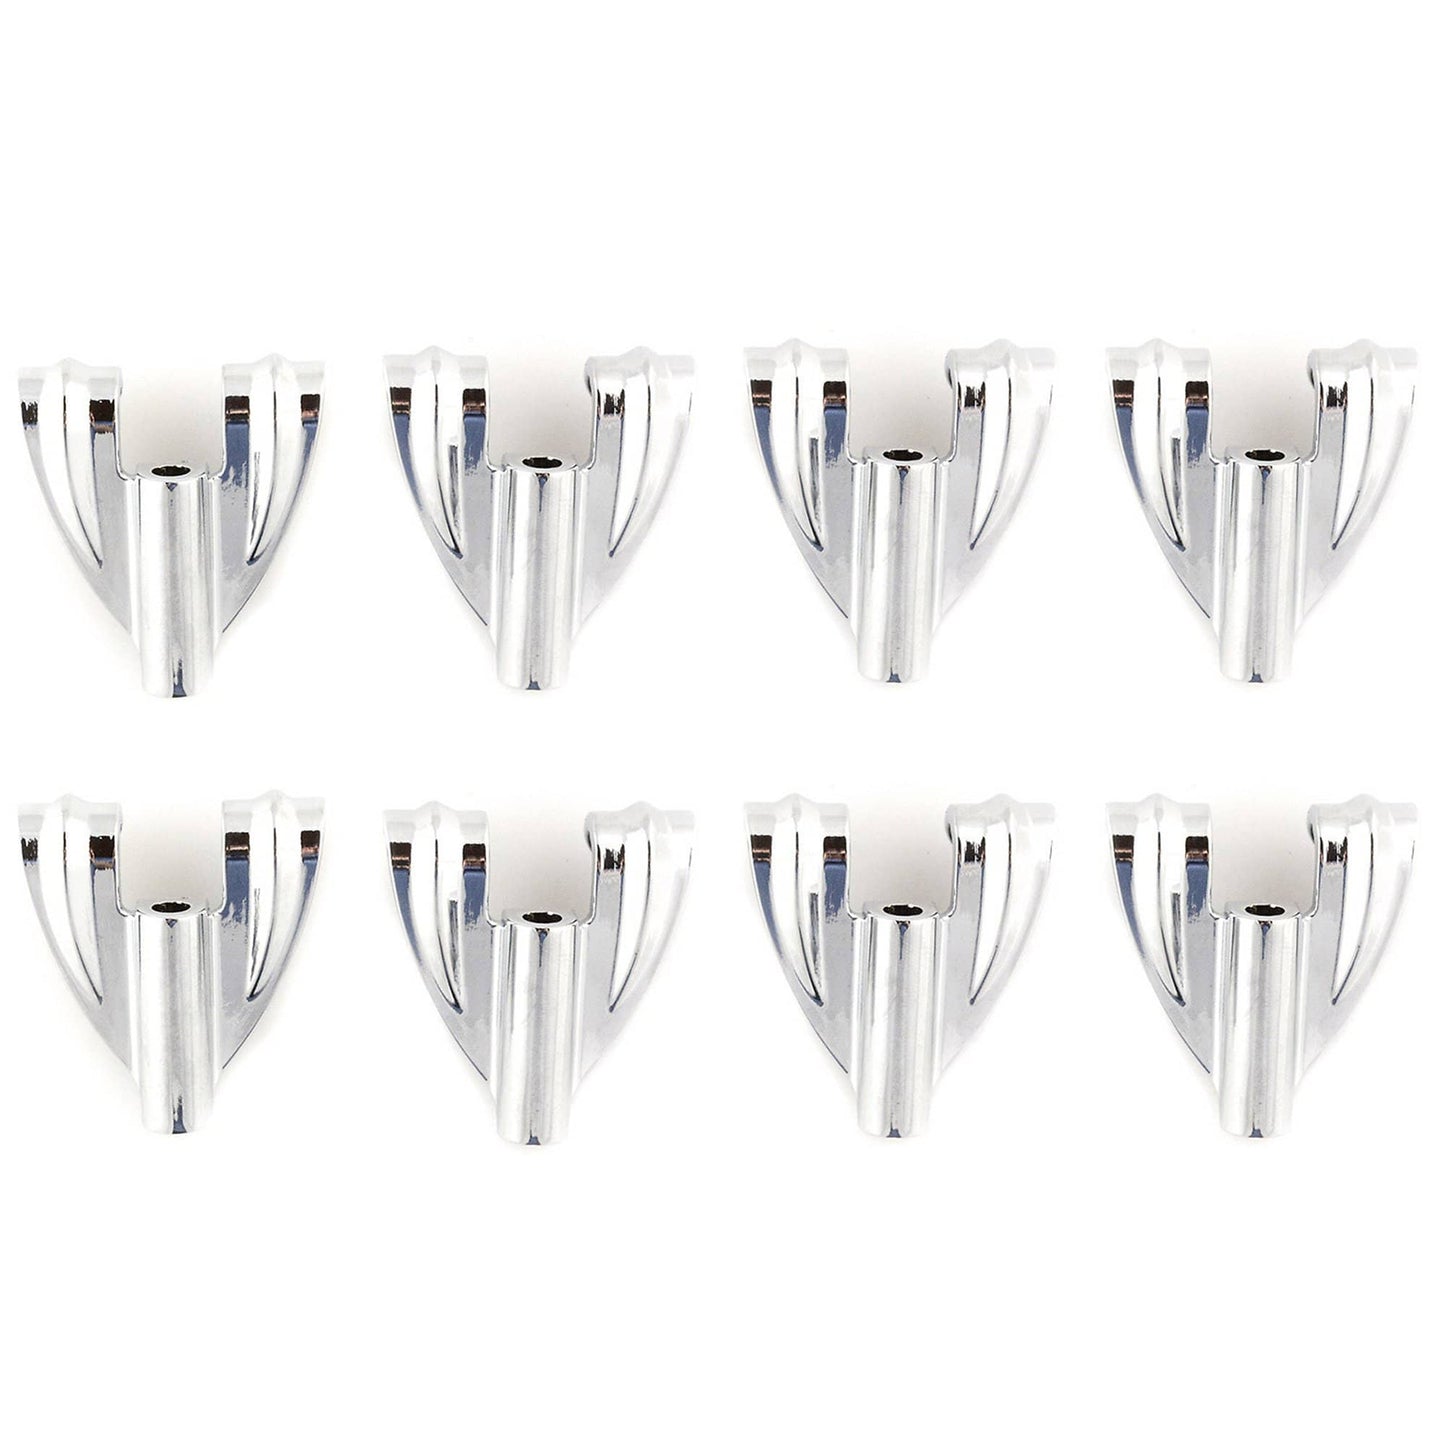 Ludwig Classic Bass Drum Claw Hooks (8 Pack Bundle) Drums and Percussion / Parts and Accessories / Drum Parts